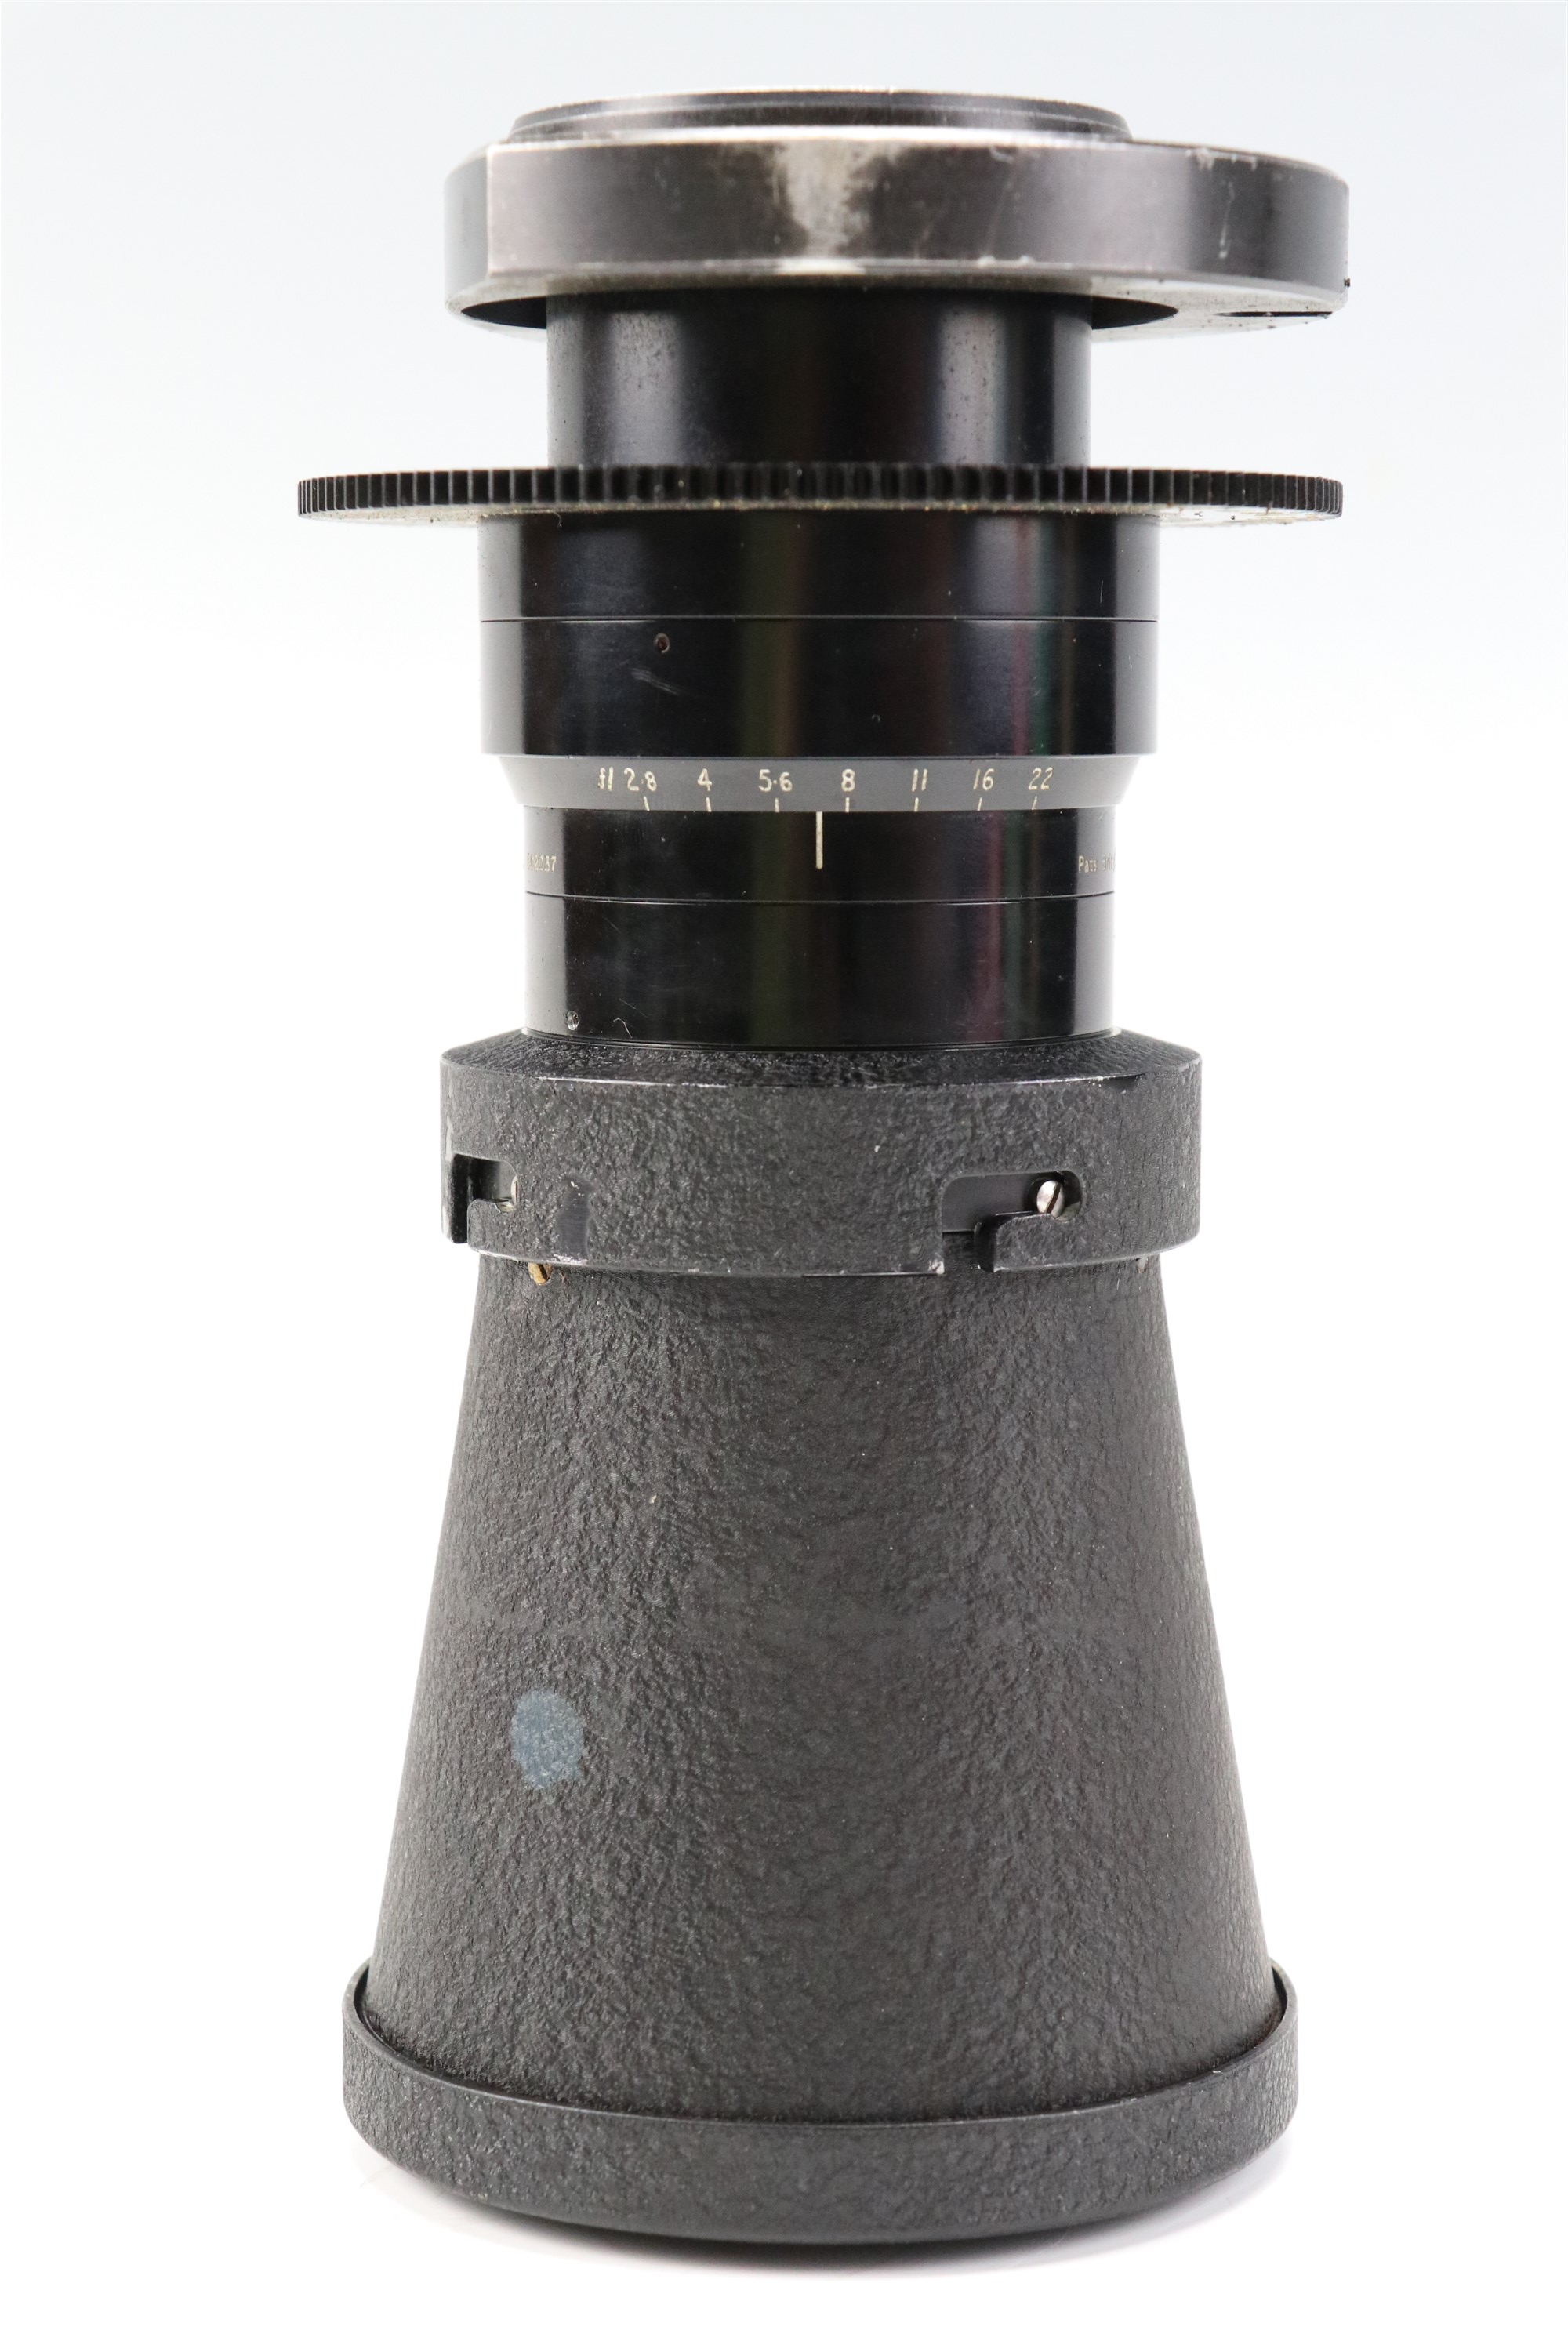 A cased set of Taylor and Hobson camera lenses, comprising an Ortal 2 inch 50 mm f/2 T2.3 TV Lens, - Image 19 of 39